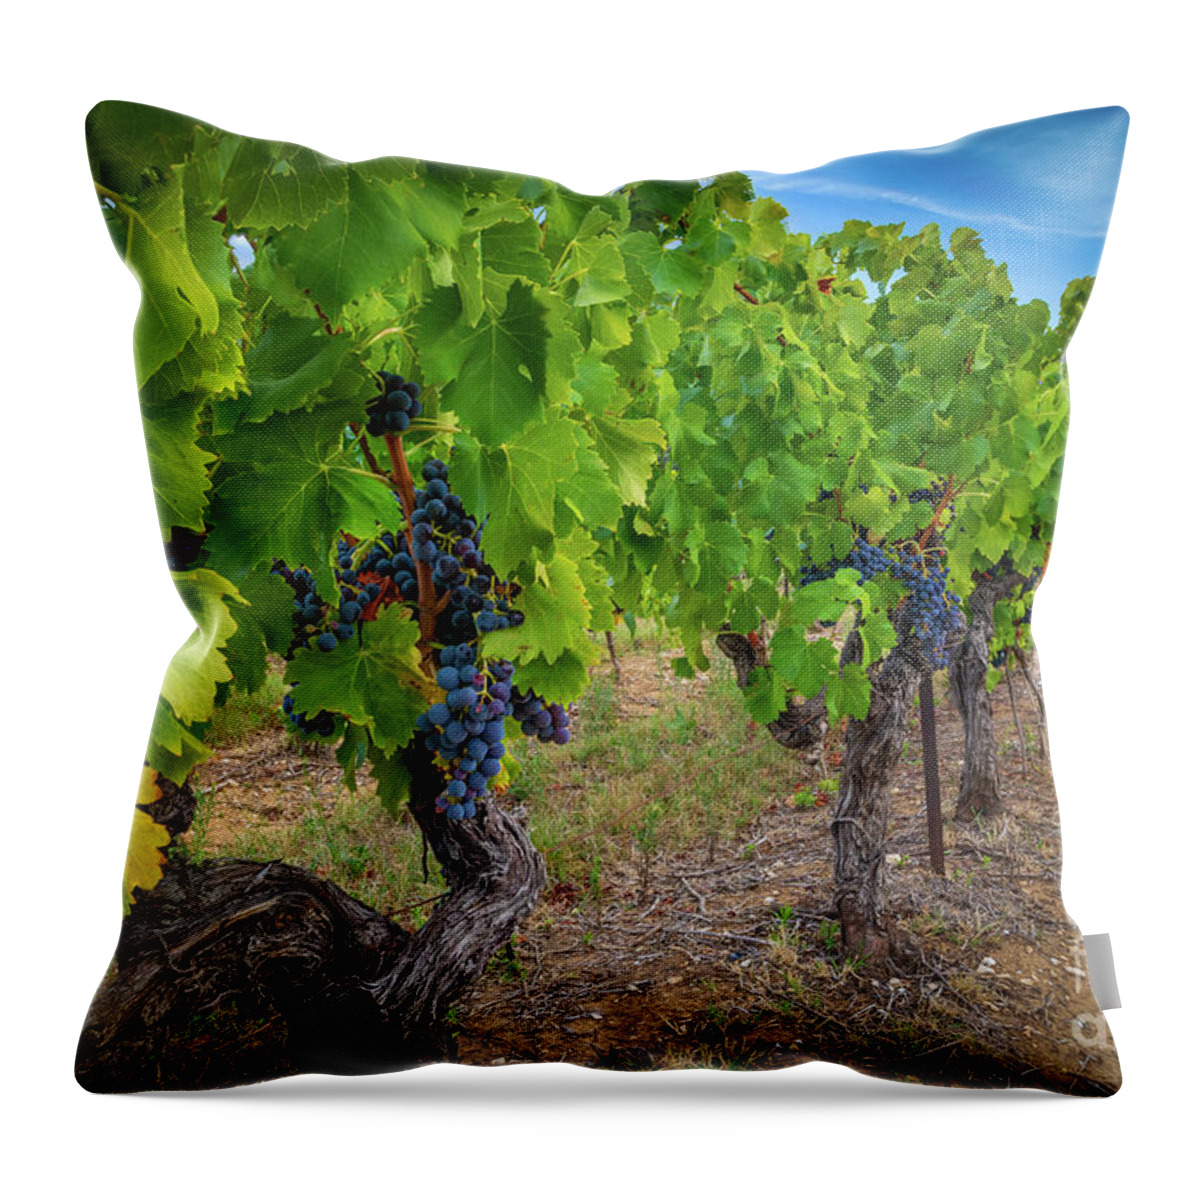 Coustellet Throw Pillow featuring the photograph Oppede Vineyard by Inge Johnsson